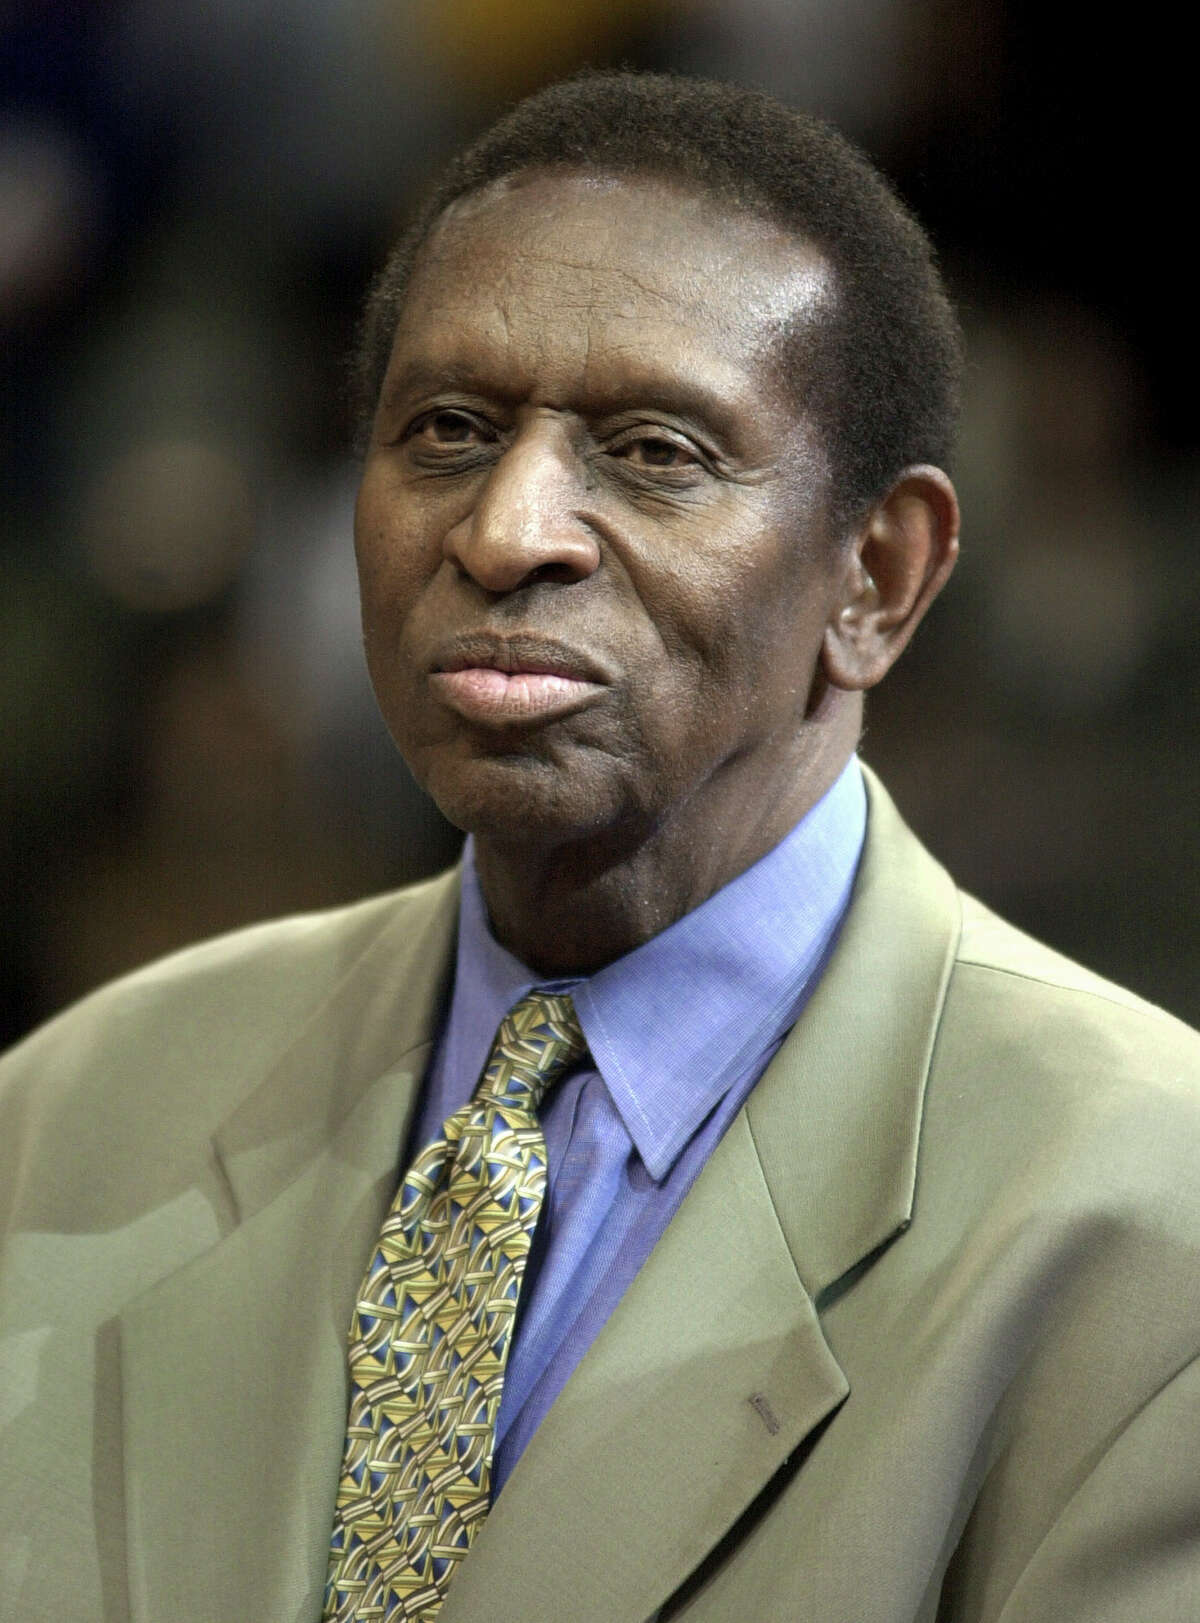 In this Apirl 23, 2003, file photo, Earl Lloyd is honored at halftime of the Detroit Pistons-Orlando Magic NBA basketball playoff game in Auburn Hills, Mich. Lloyd, the first black player in NBA history, died Thursday, Feb. 26, 2015. He was 86. Lloyd's alma mater, West Virginia State, confirmed the death. It did not provide details. Lloyd made his NBA debut in 1950 for the Washington Capitals, just before fellow black players Sweetwater Clifton and Chuck Cooper played their first games. (AP Photo/Paul Sancya, File)